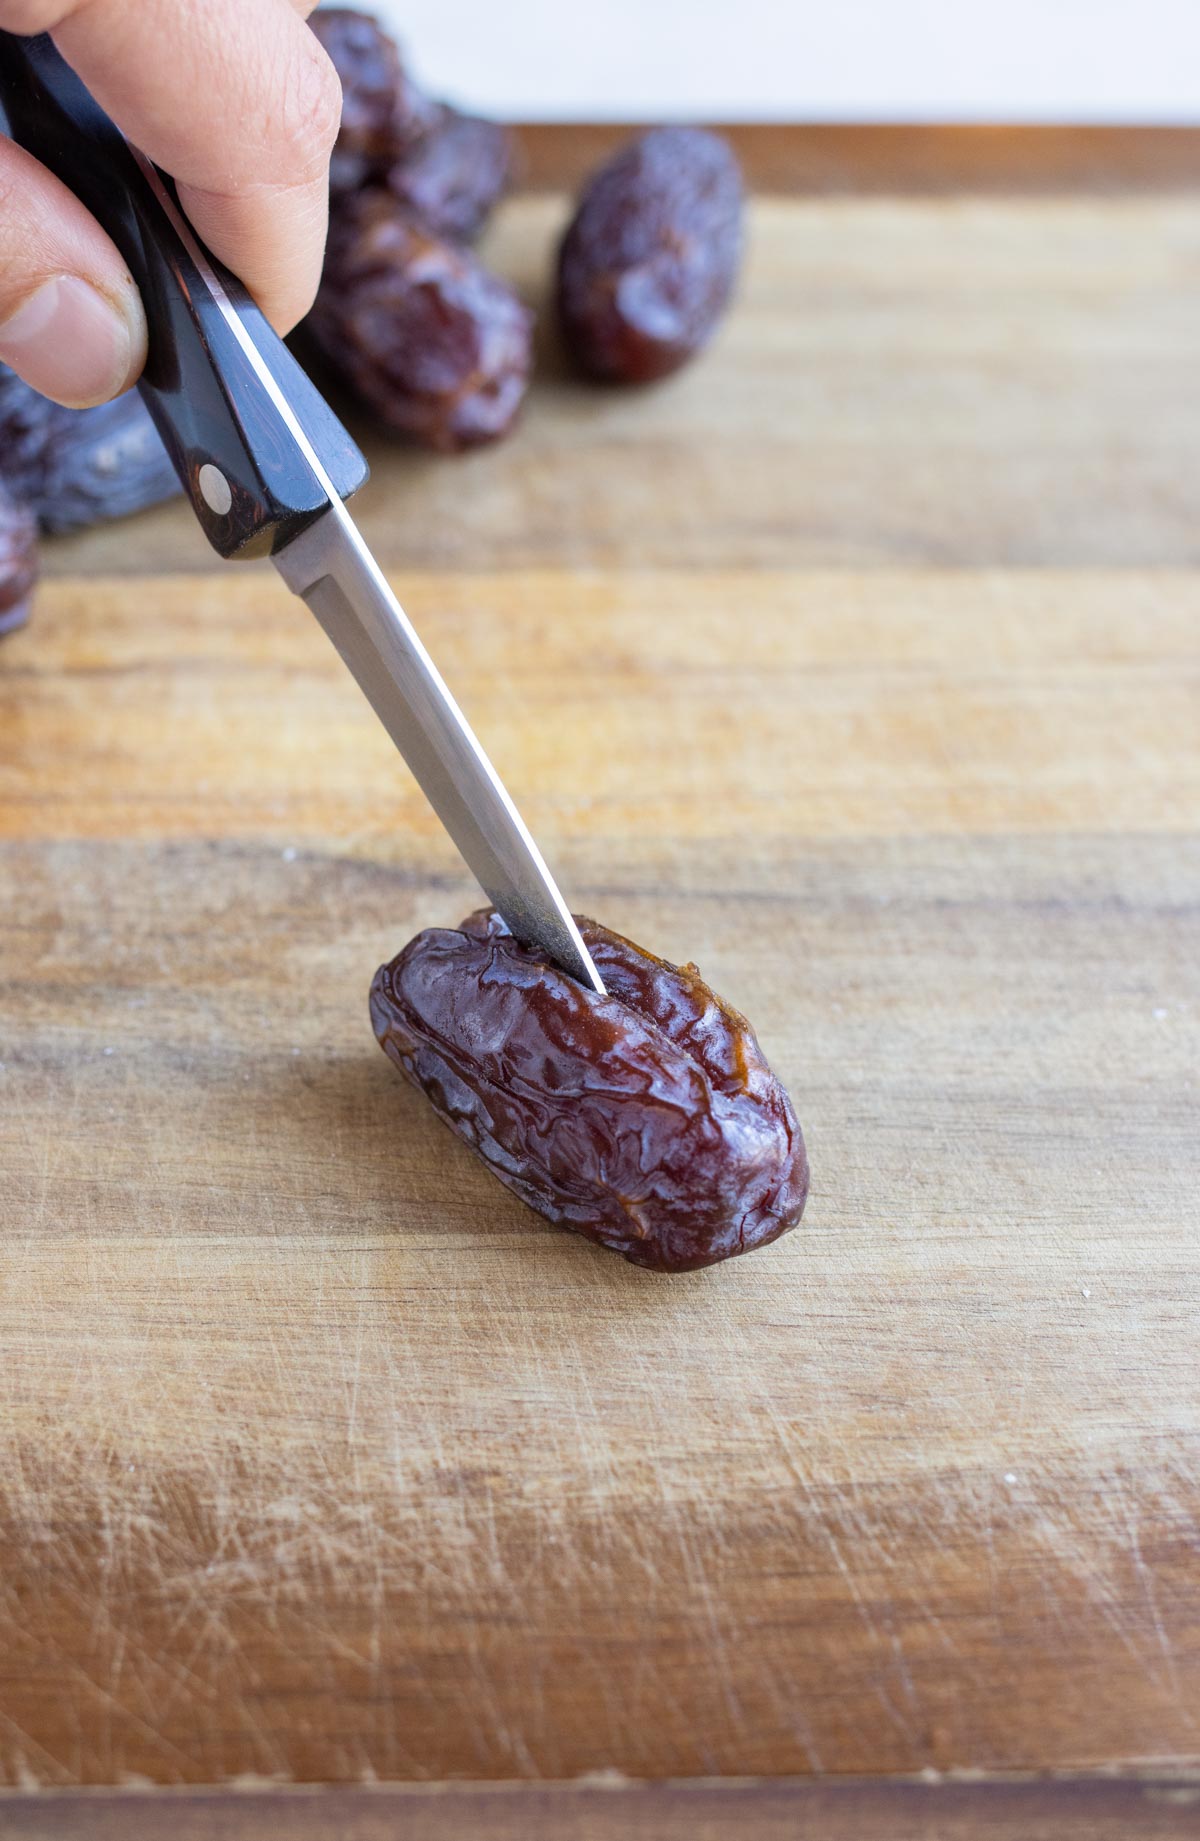 The medjool dates are slit down the center.